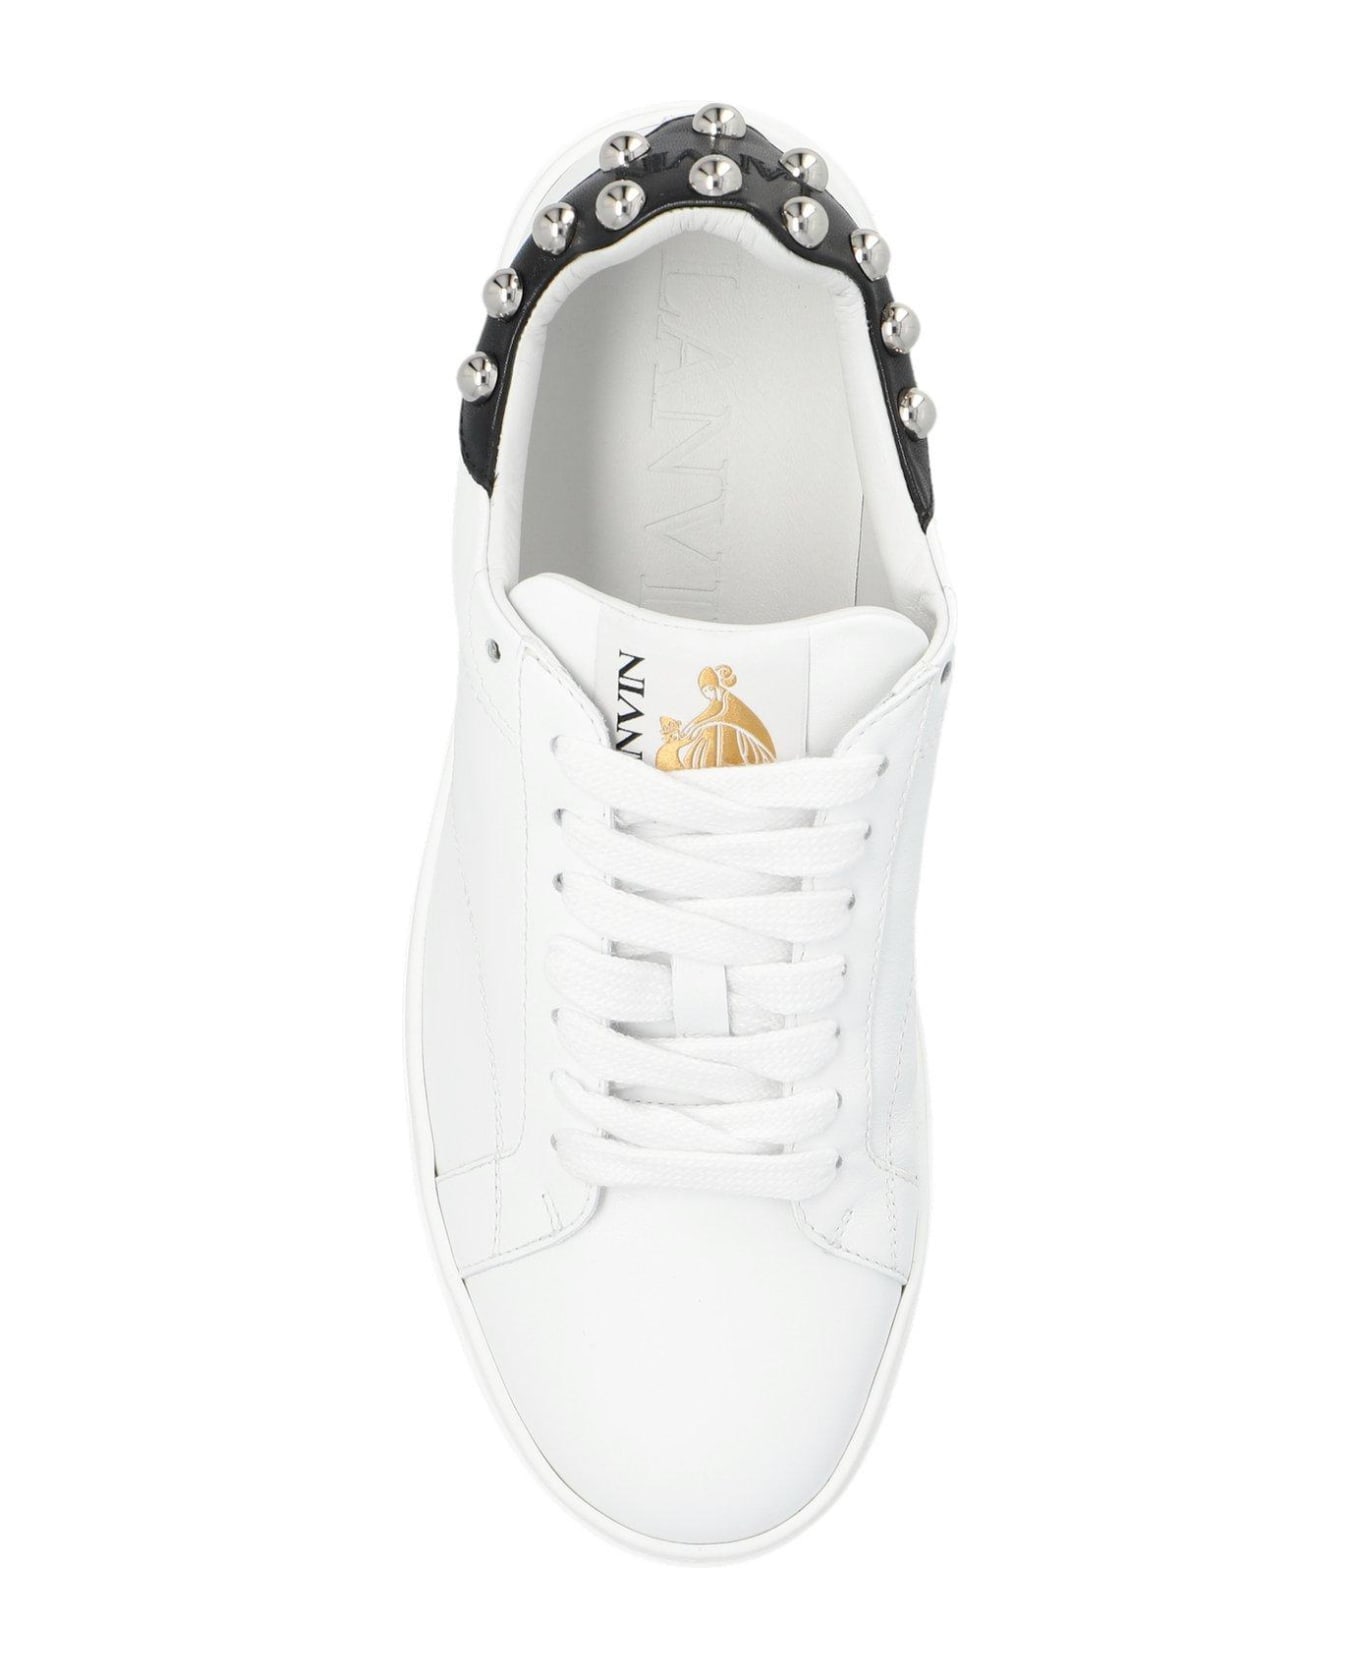 Lanvin Round Toe Lace-up Sneakers - White Silver